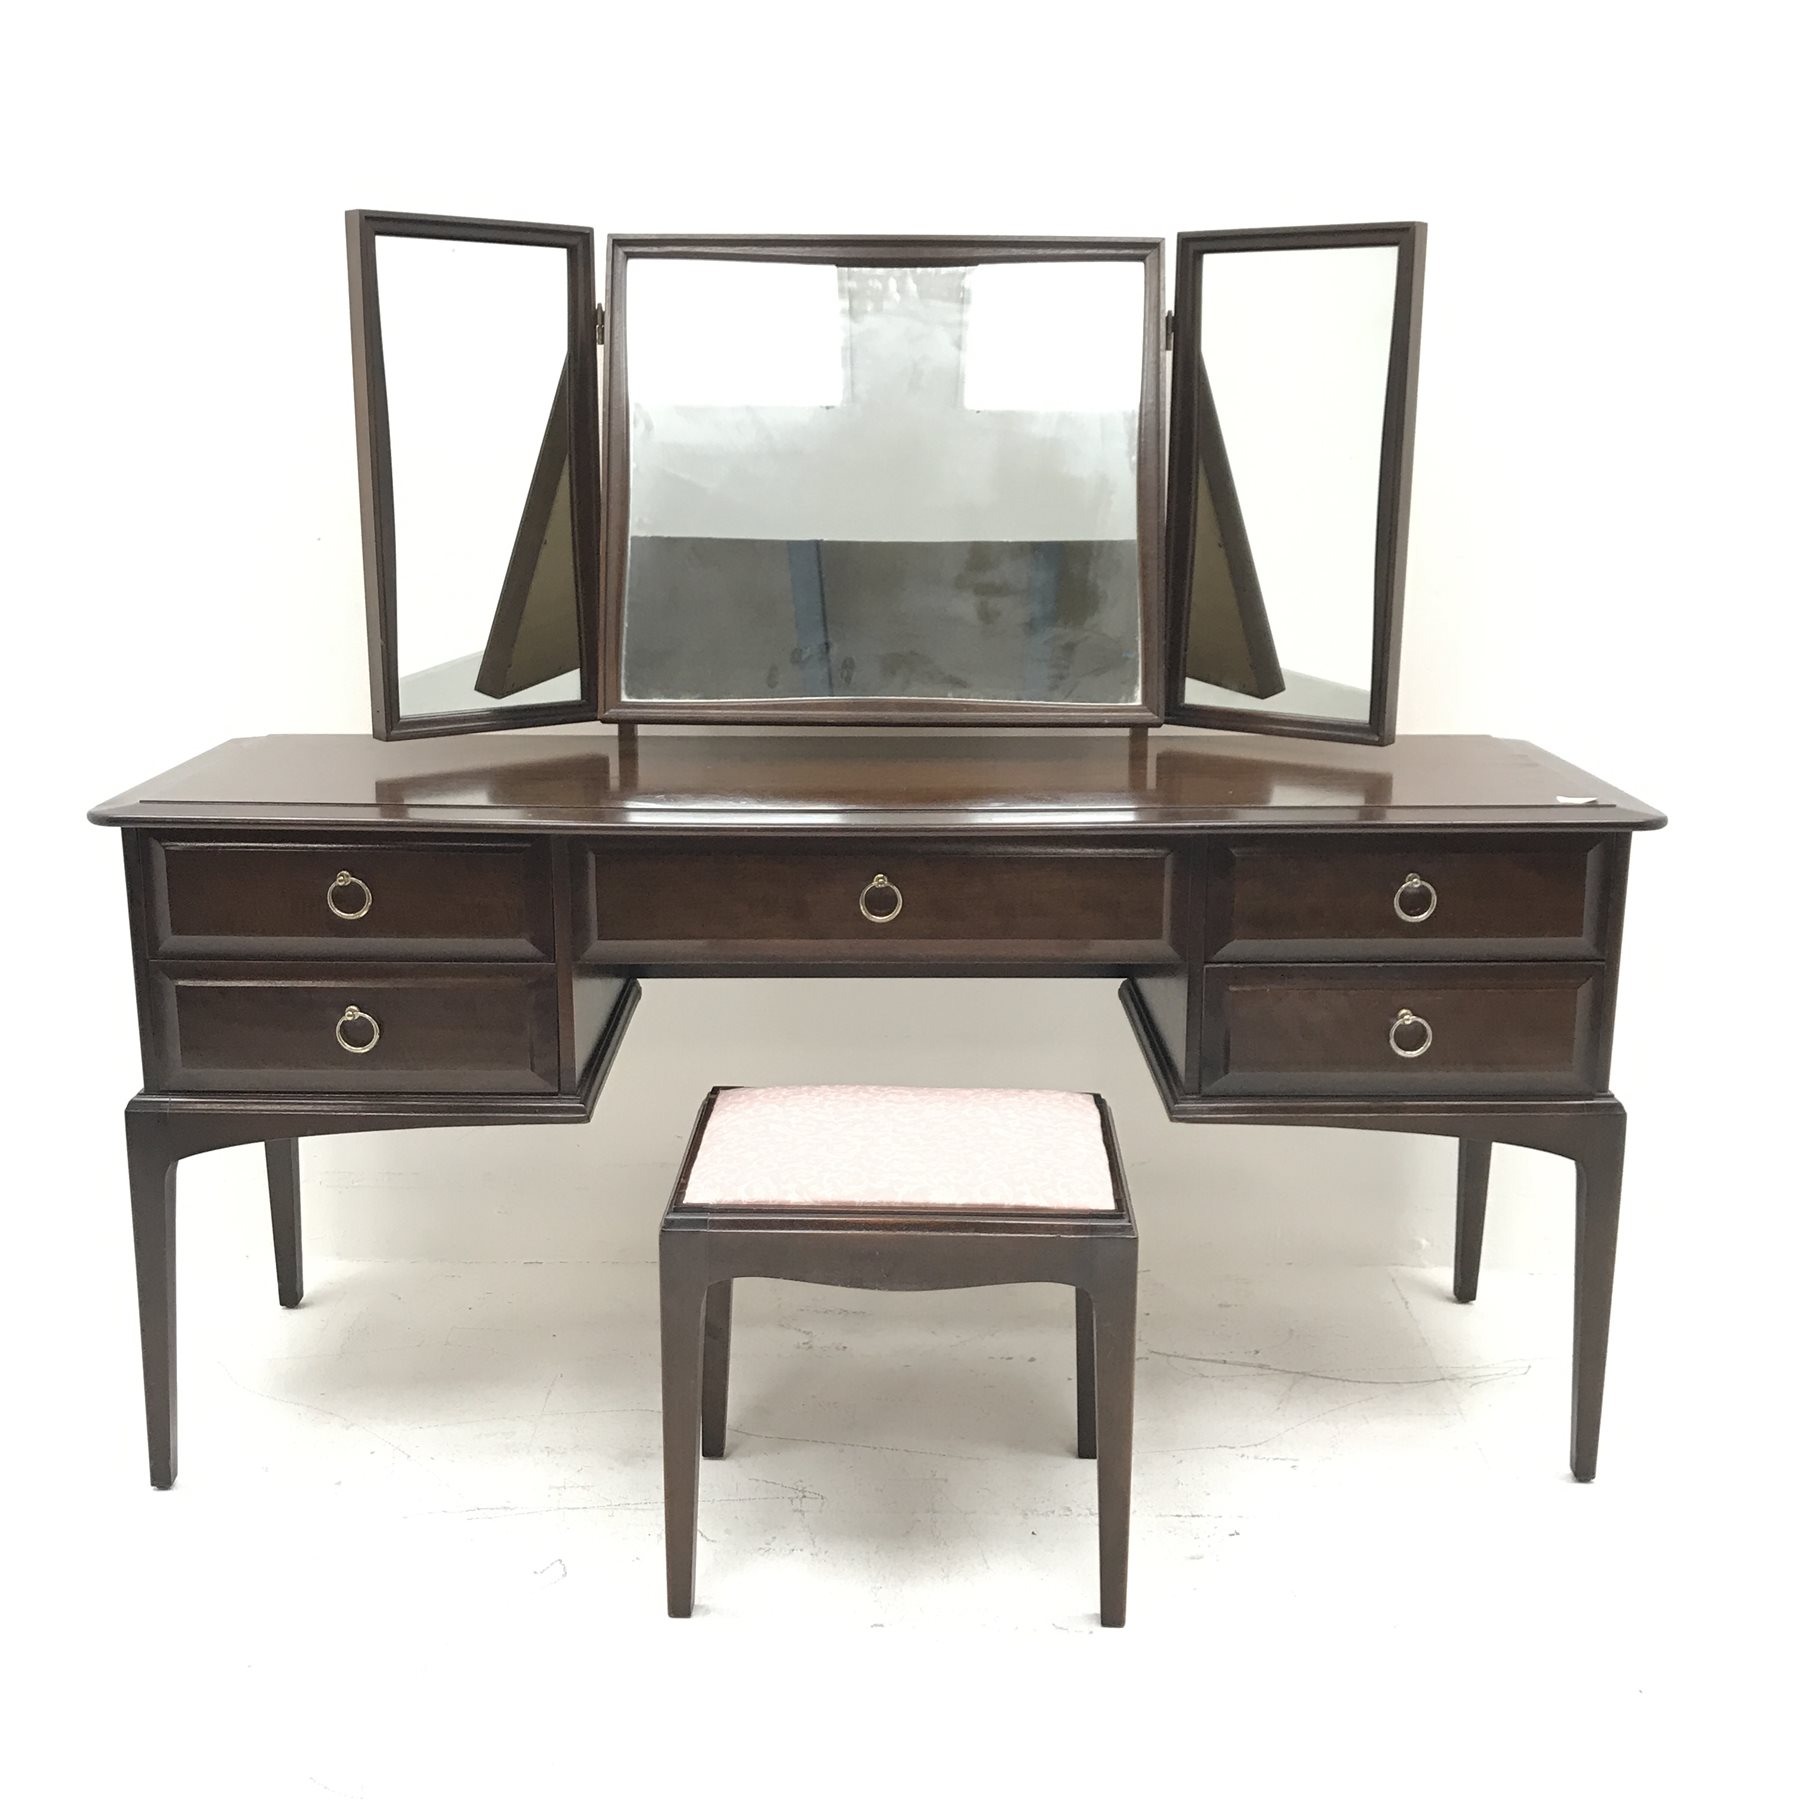 Stag mahogany dressing table, raised three piece mirror back, five drawers, square tapering supports